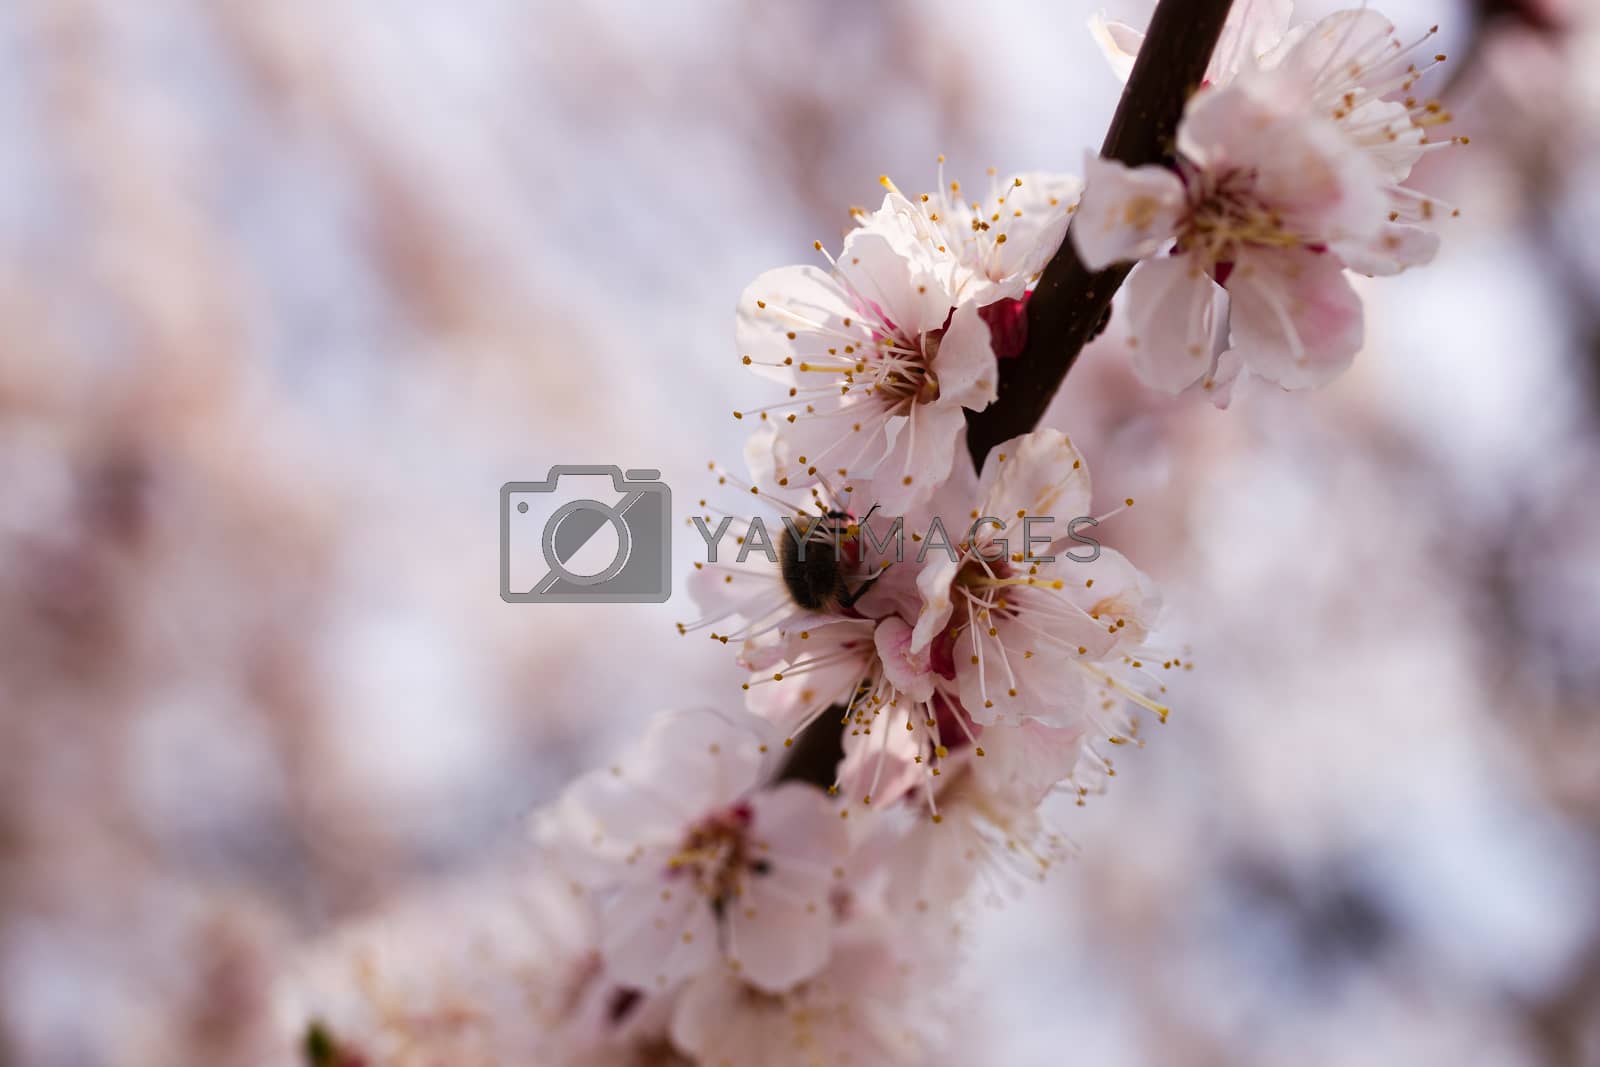 Royalty free image of Apricot flower inflorescences on blurred background. by alexsdriver